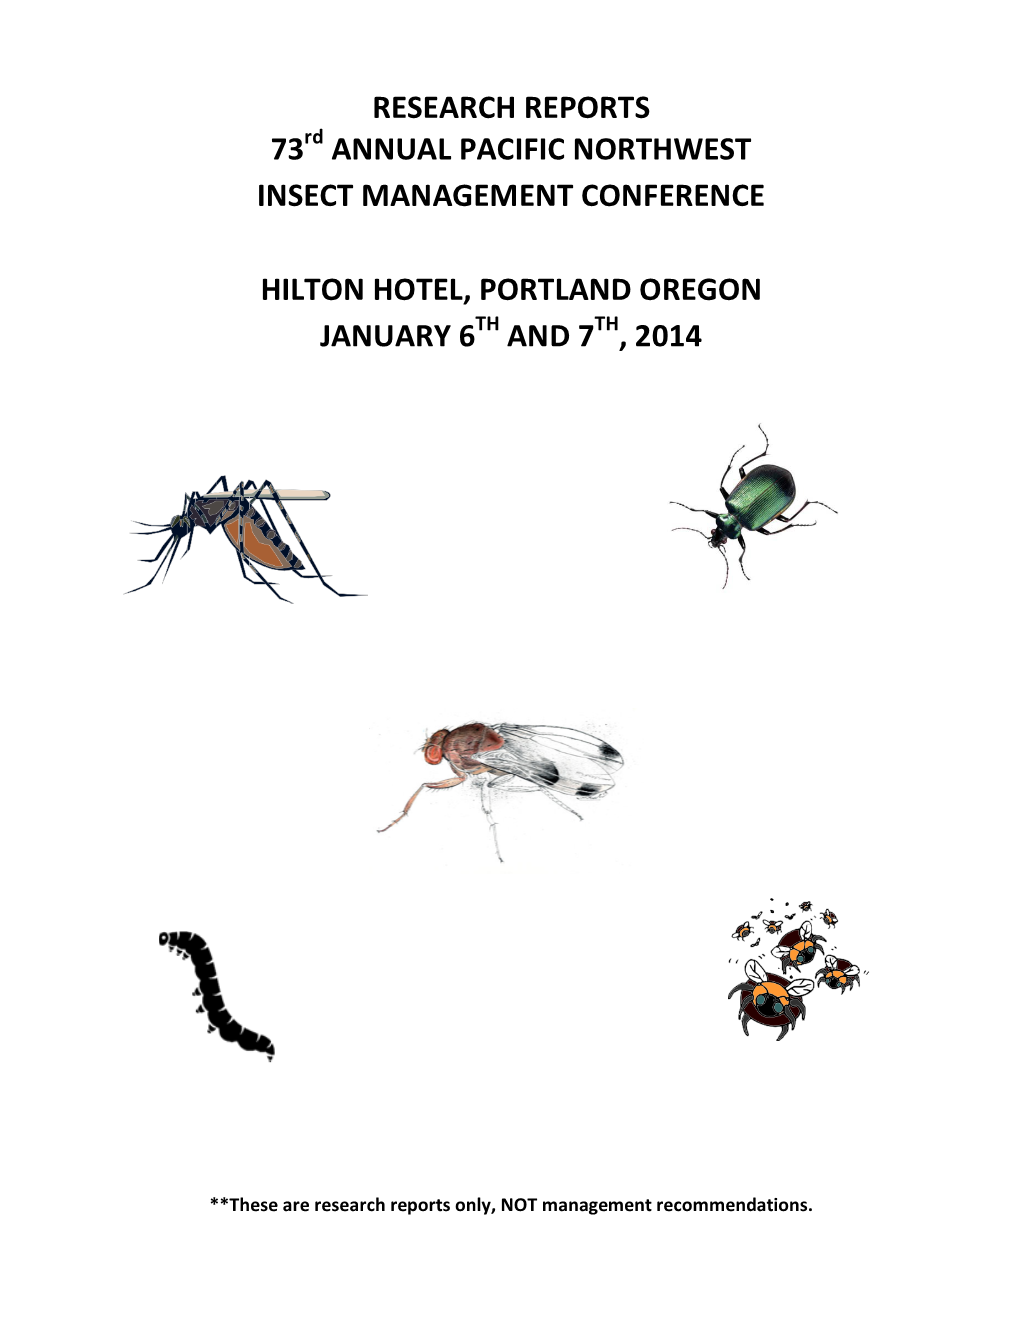 Research Reports 73 Annual Pacific Northwest Insect